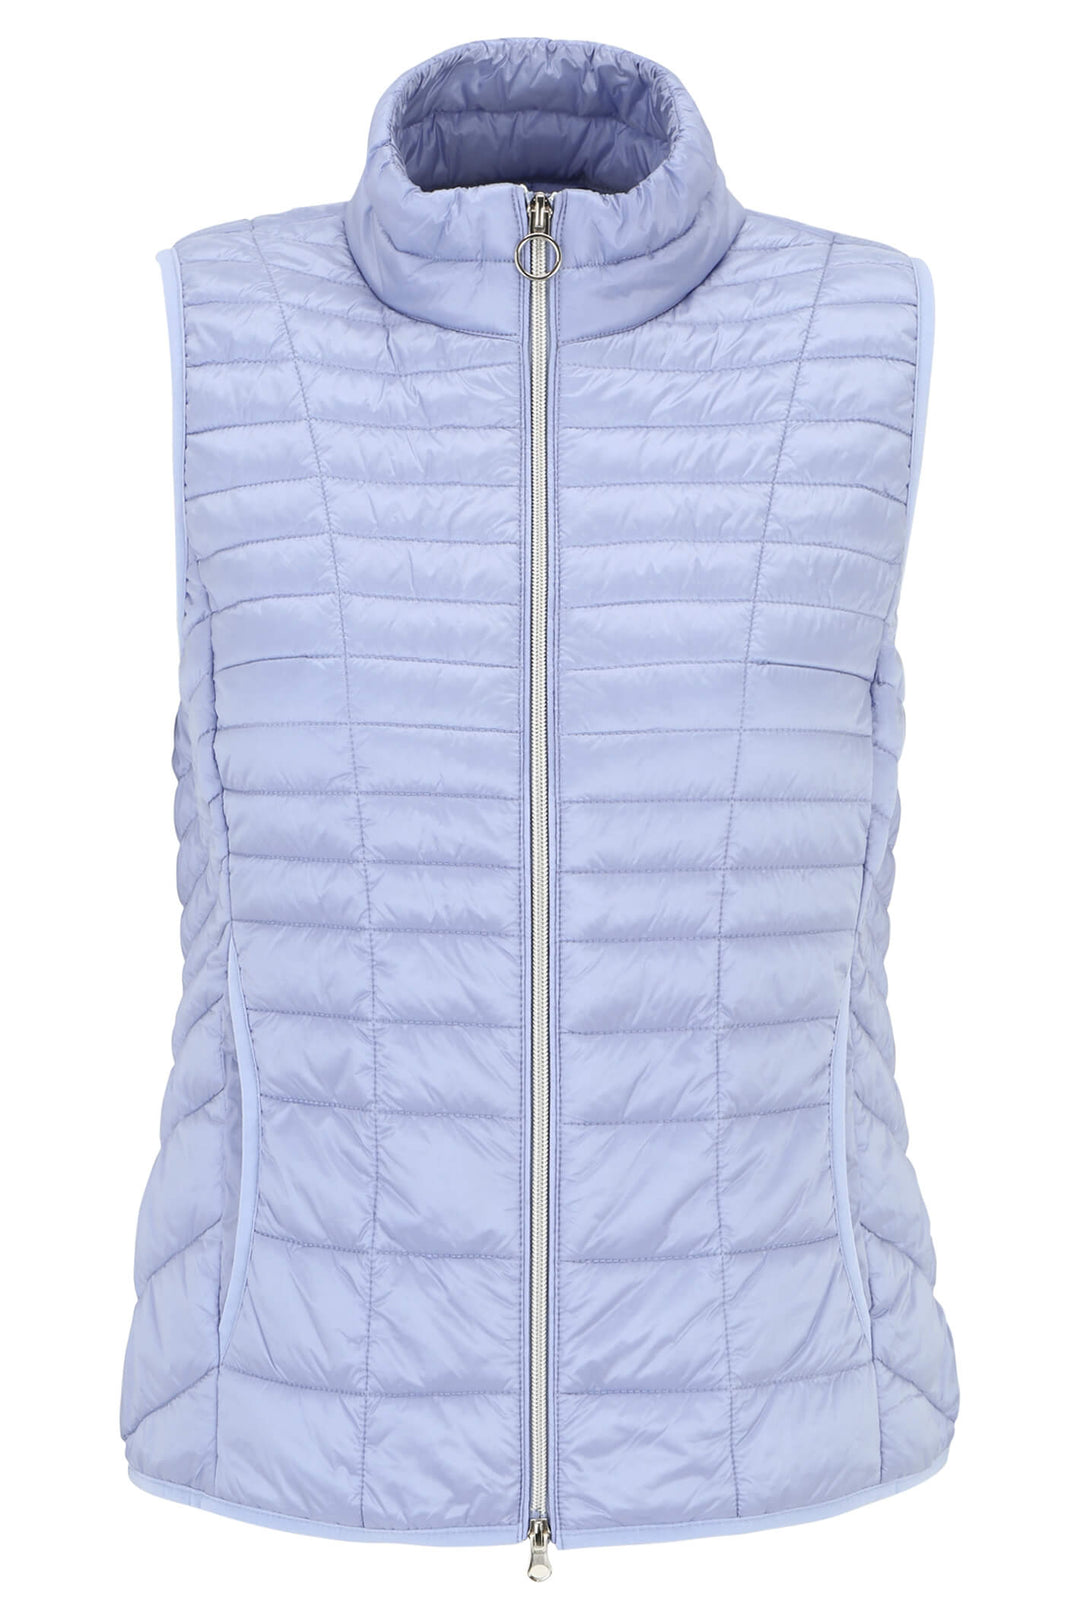 Betty Barclay 7195 1902 8002 Lavender Blue Padded Gilet - Dotique Chesterfield